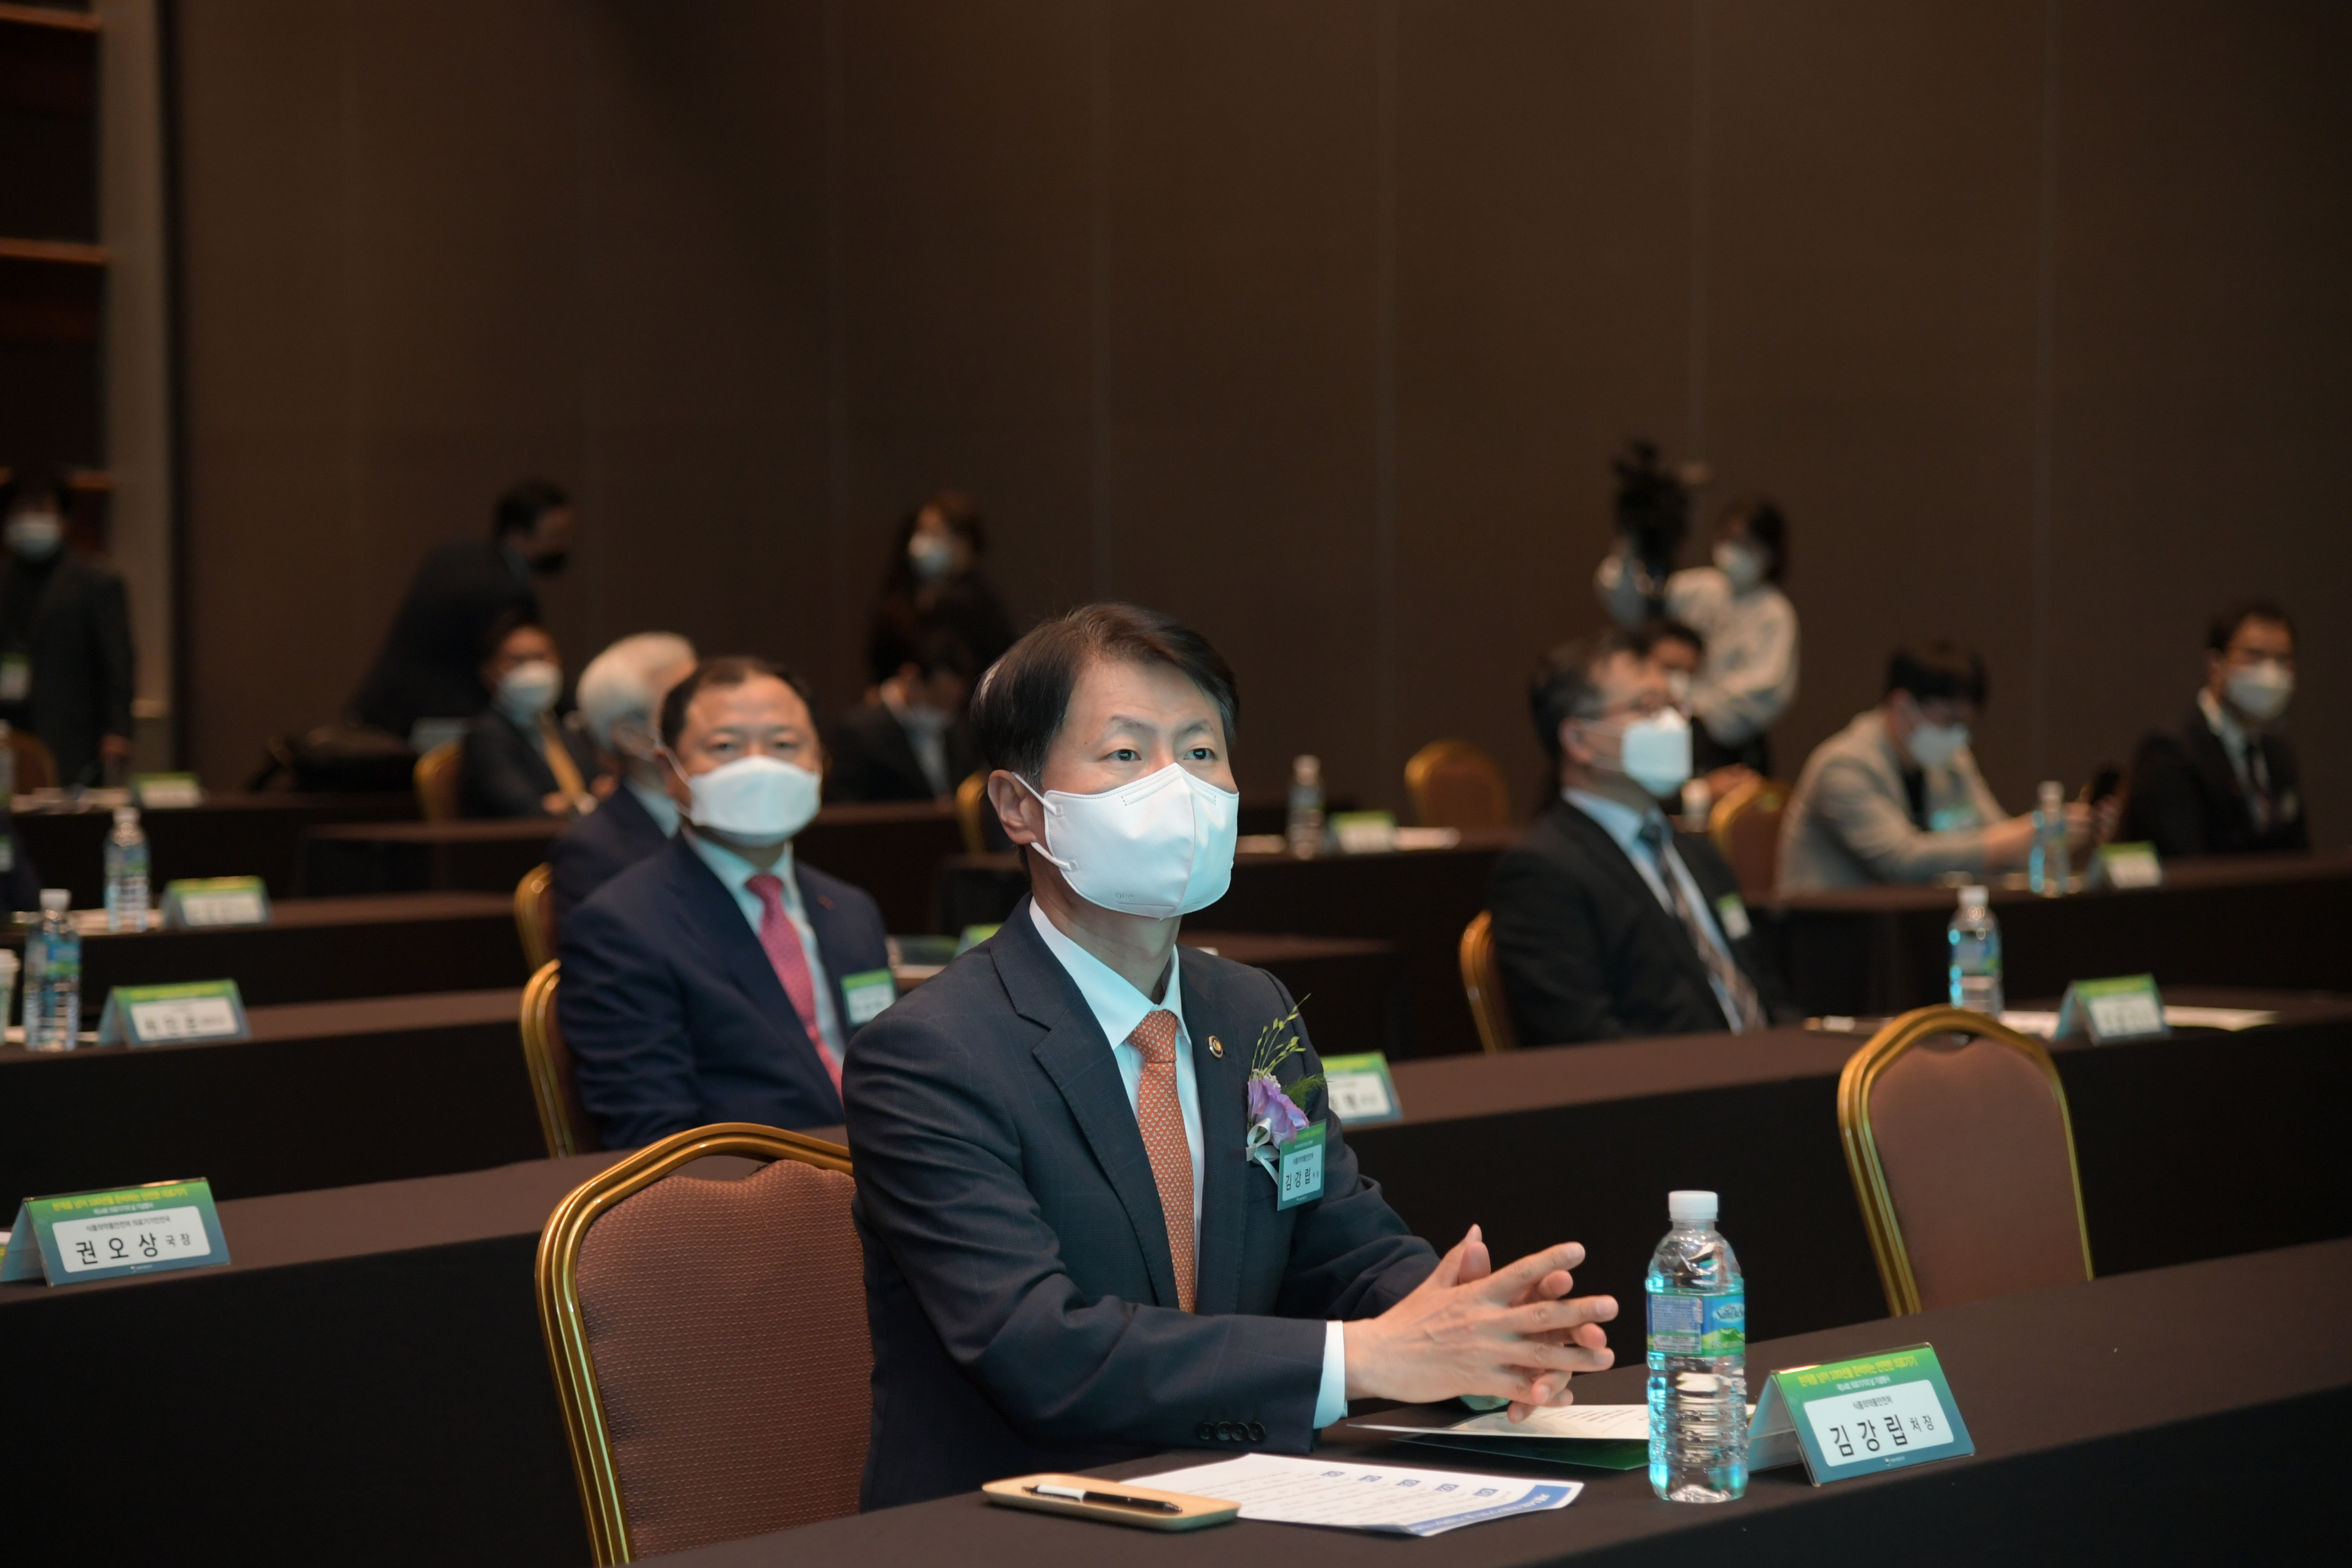 Photo News1 - [May 28, 2021] Minister attends the 14th Medical Device Day Ceremony